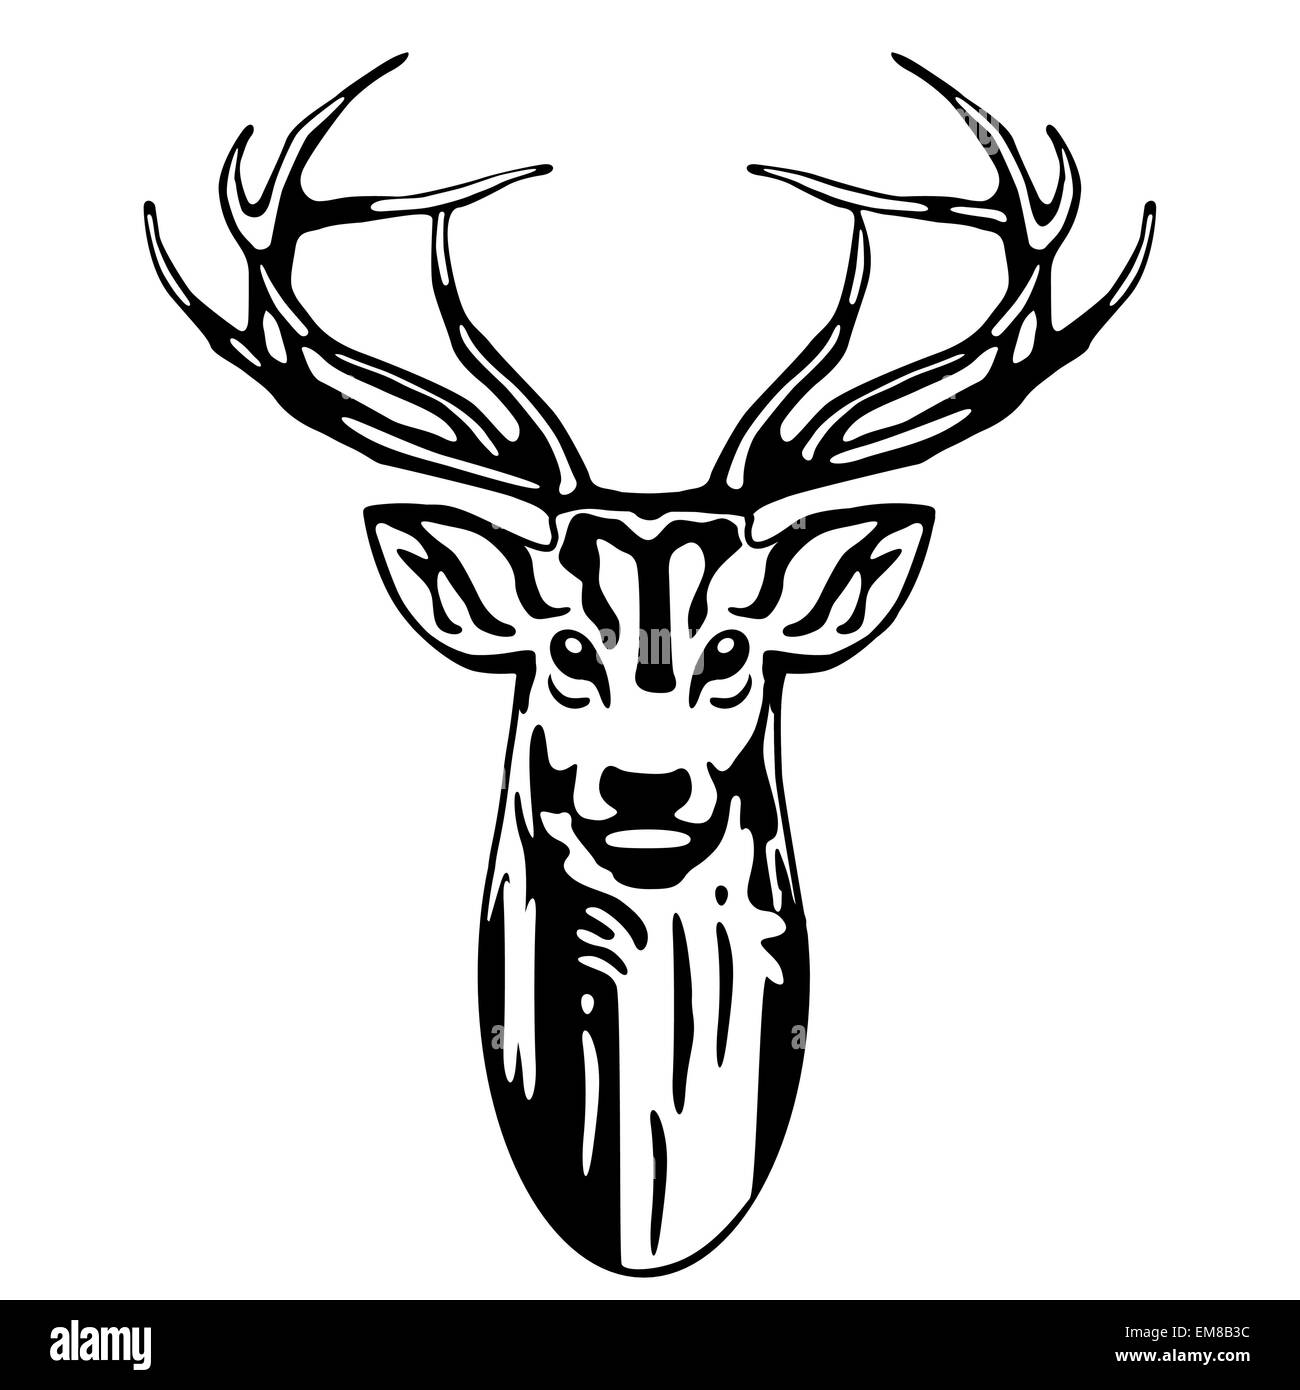 Deer head isolated on white background Stock Vector